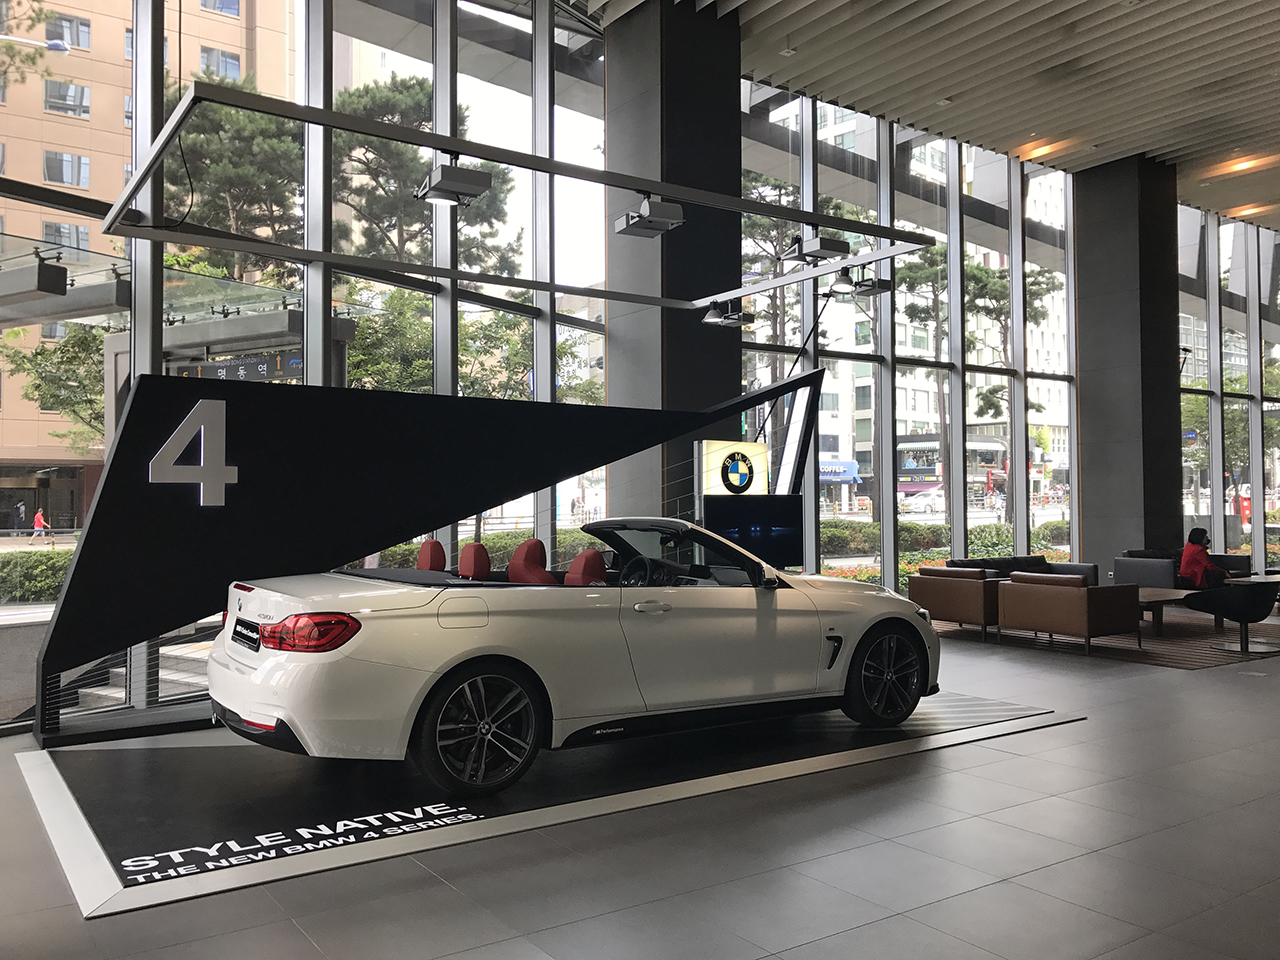 05._The_All_new_Bmw_4_Series_Exhibition_